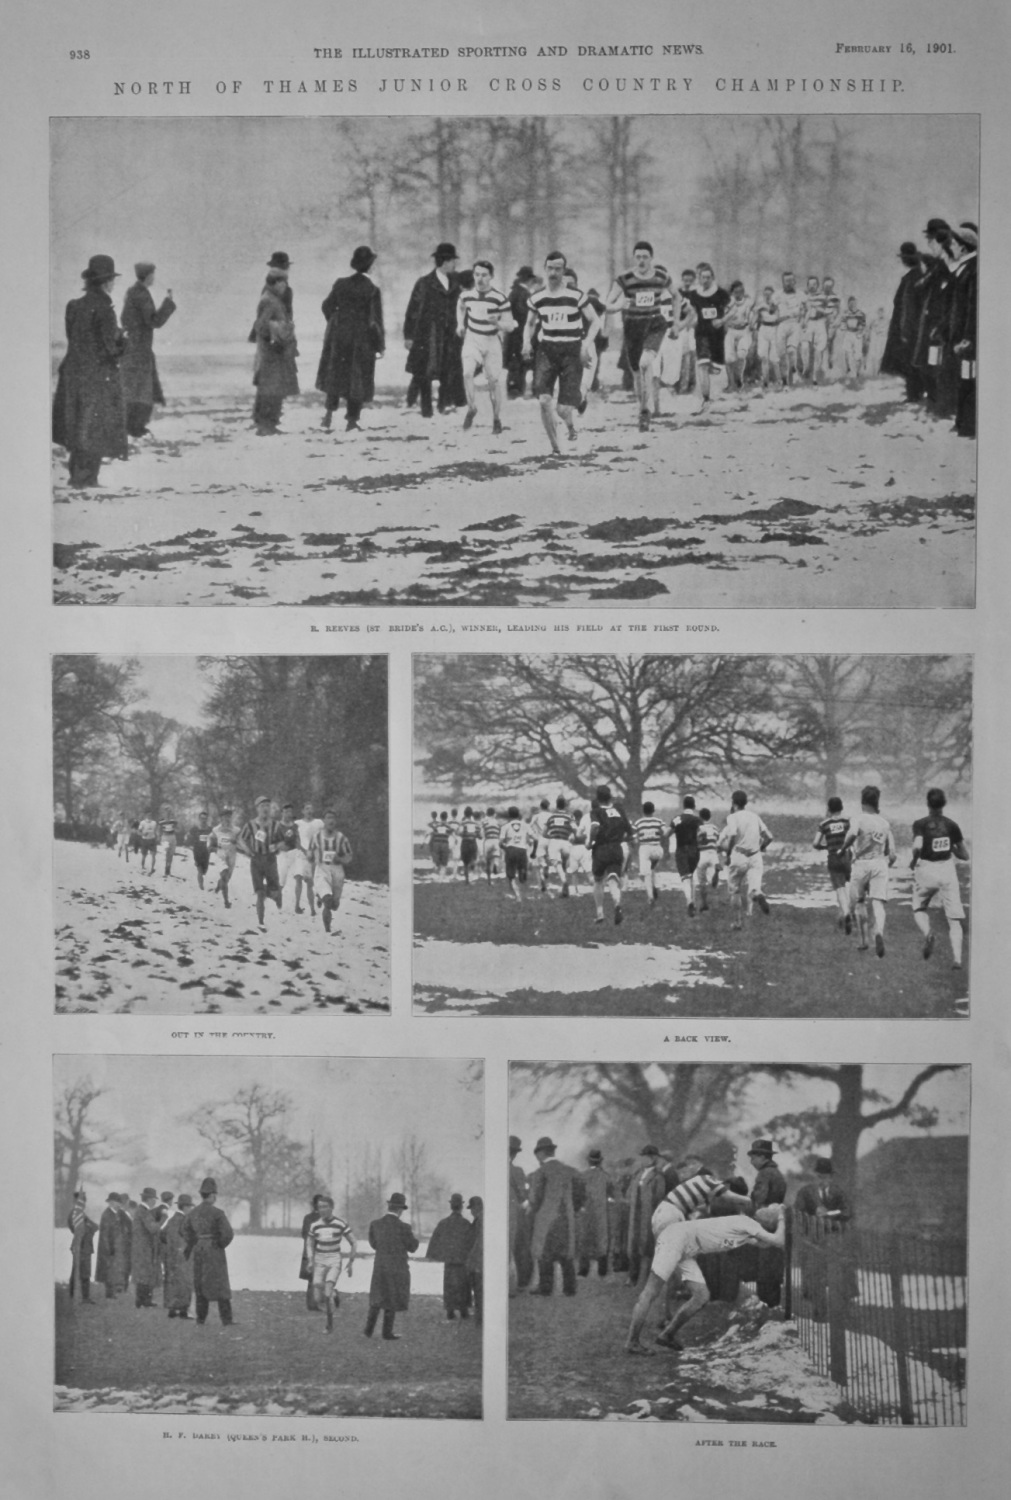 North of Thames Junior Cross Country Championship.  1901.